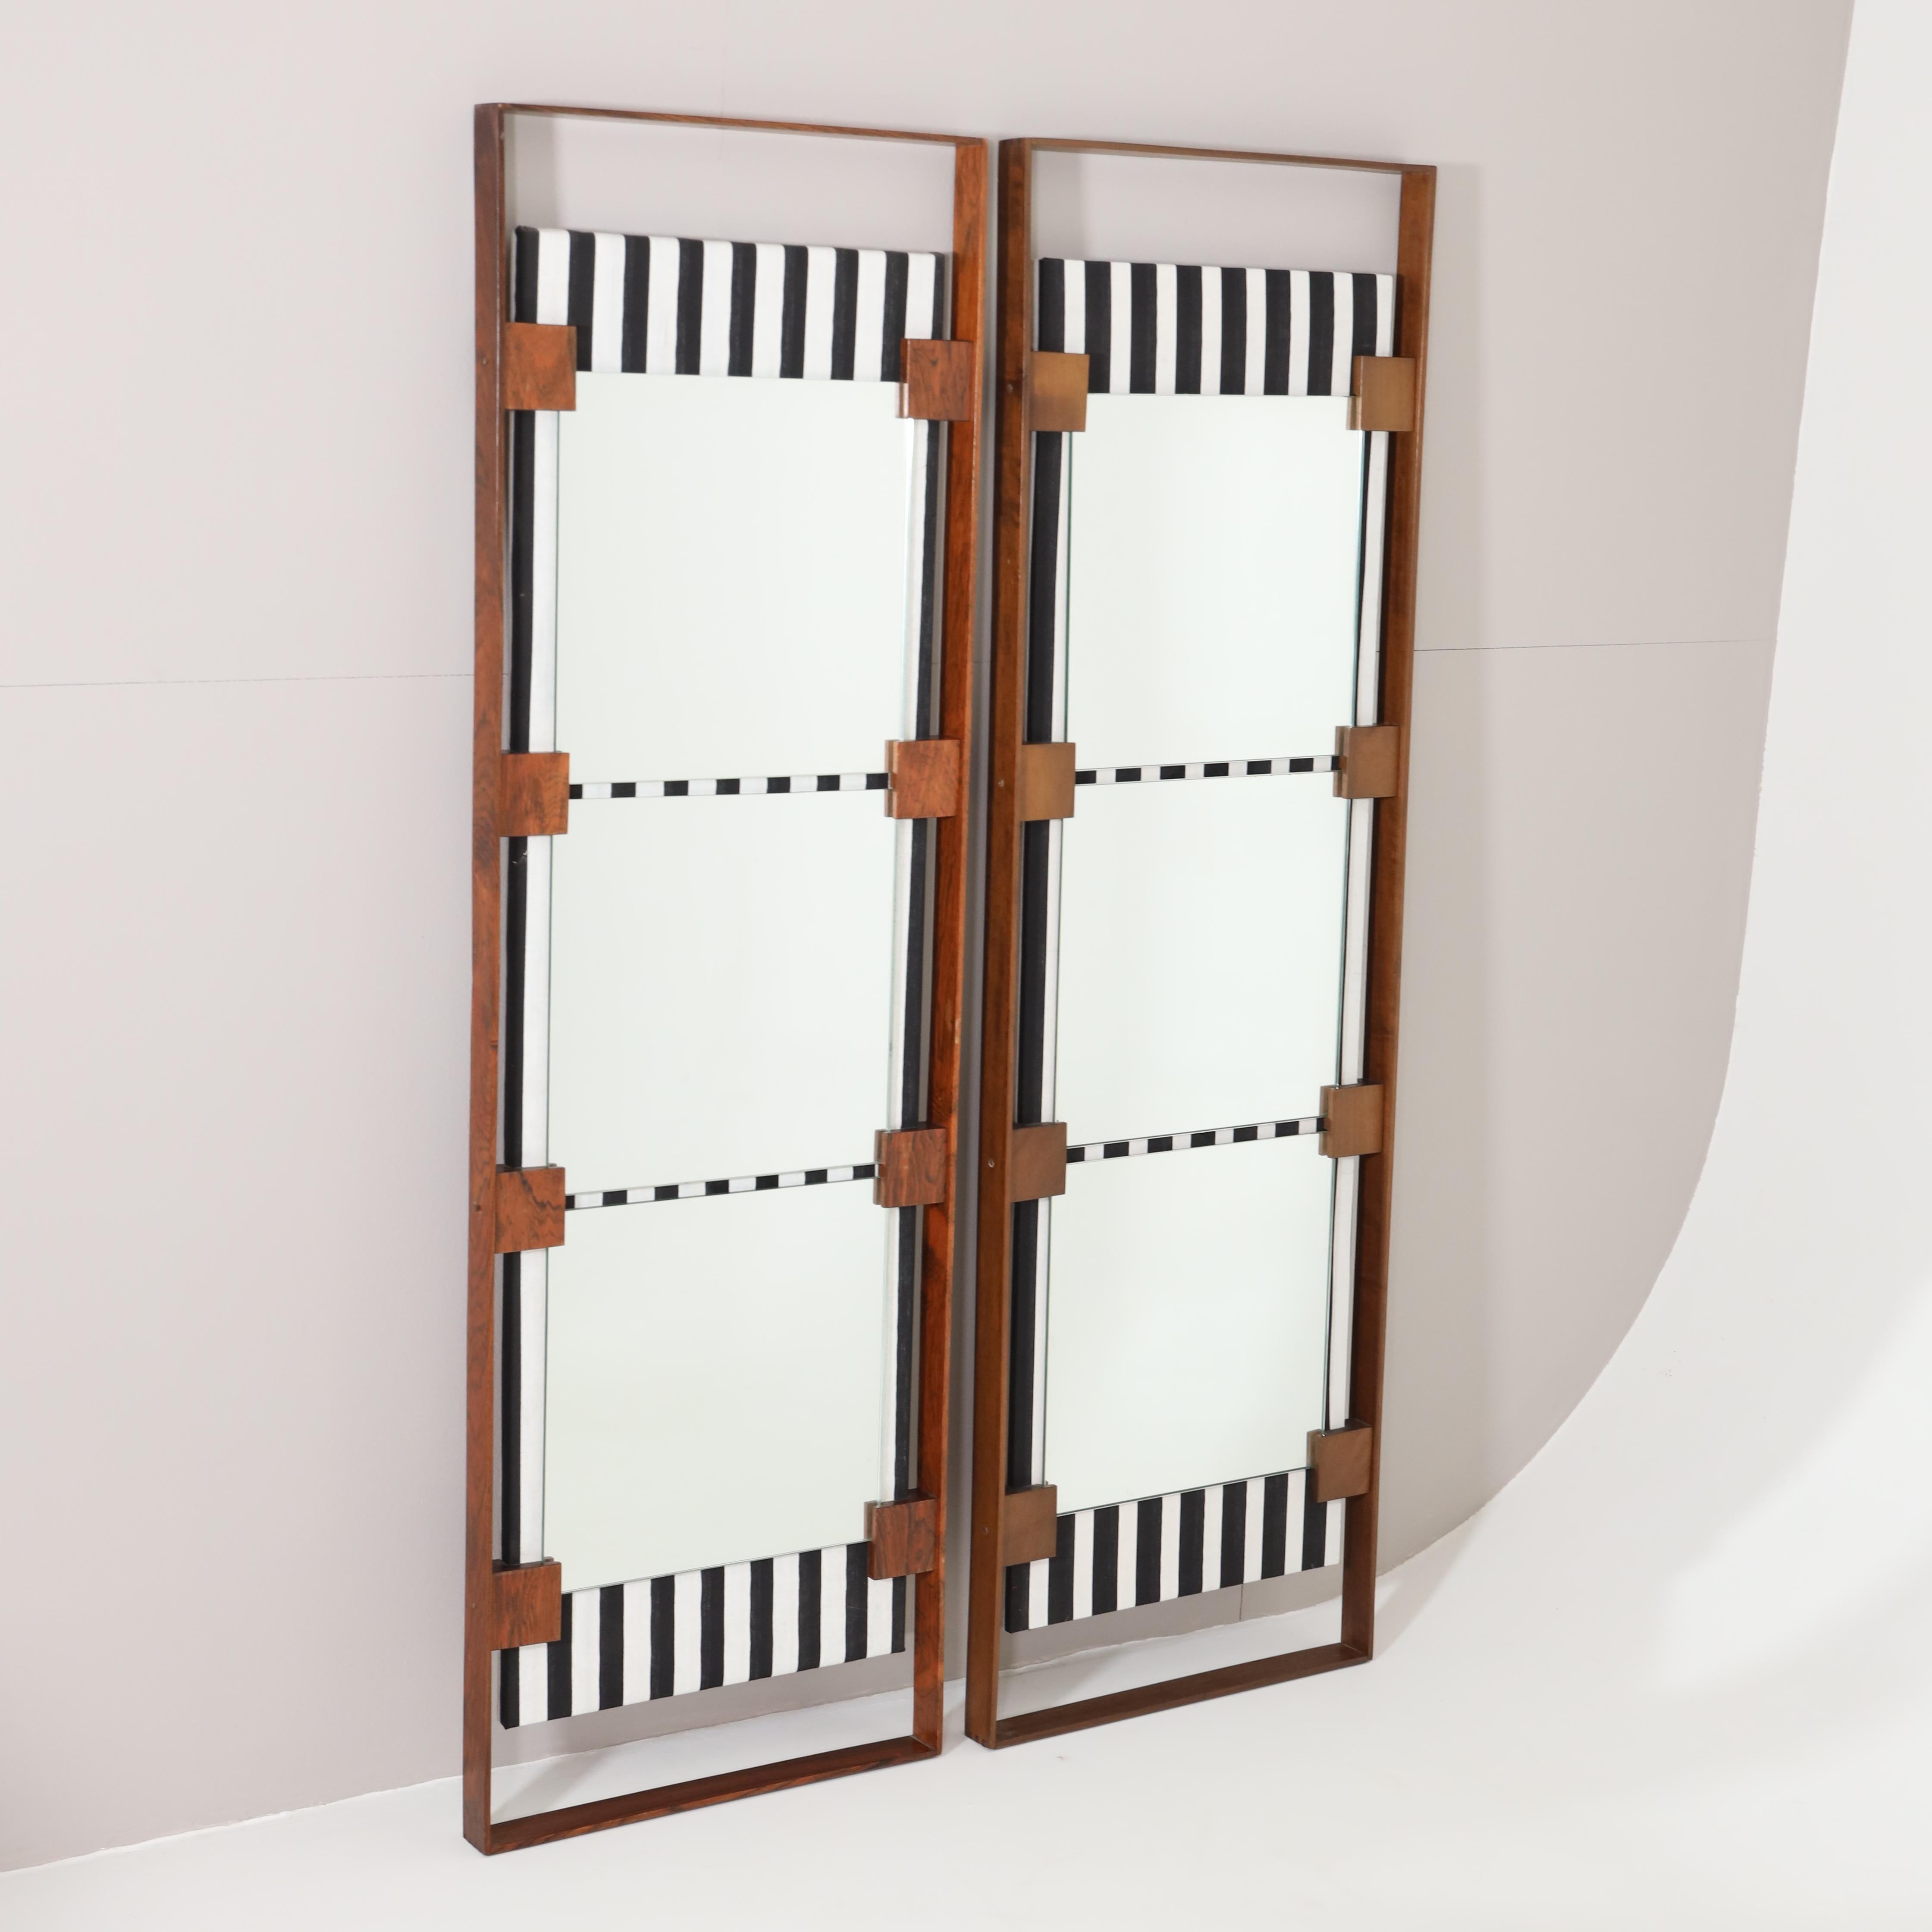 A pair of tall Italian Modern mirrors.
Walnut with black and white vertically striped fabric panel 
with three mirrors mounted on top of the panel.